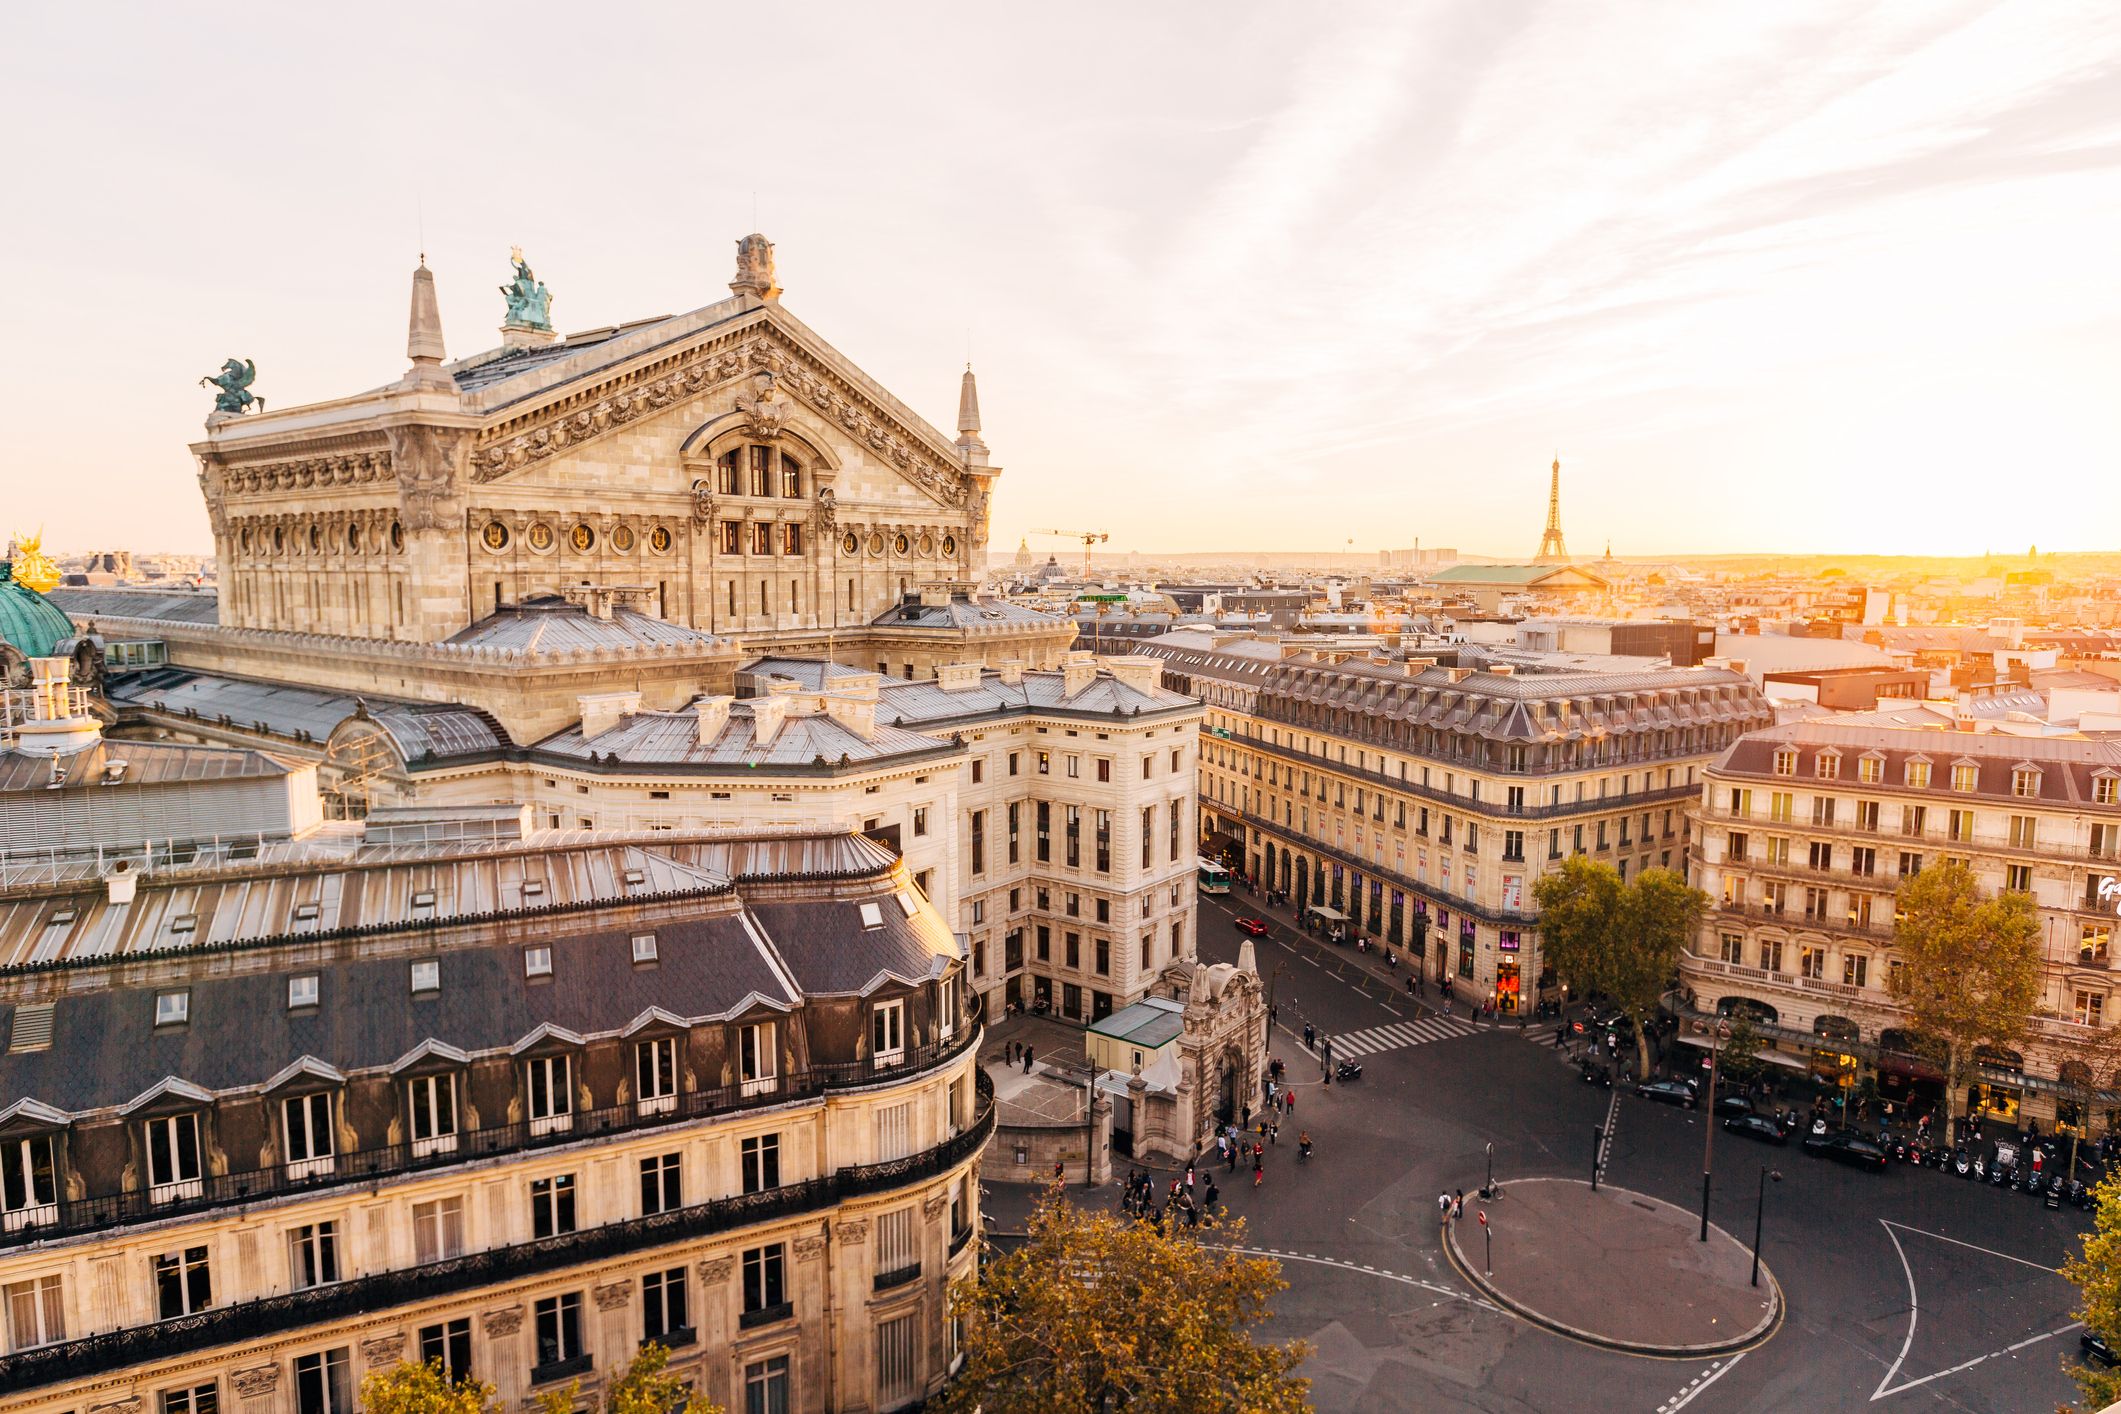 Paris at sunset - Top 10 Frequently Asked Questions about Paris